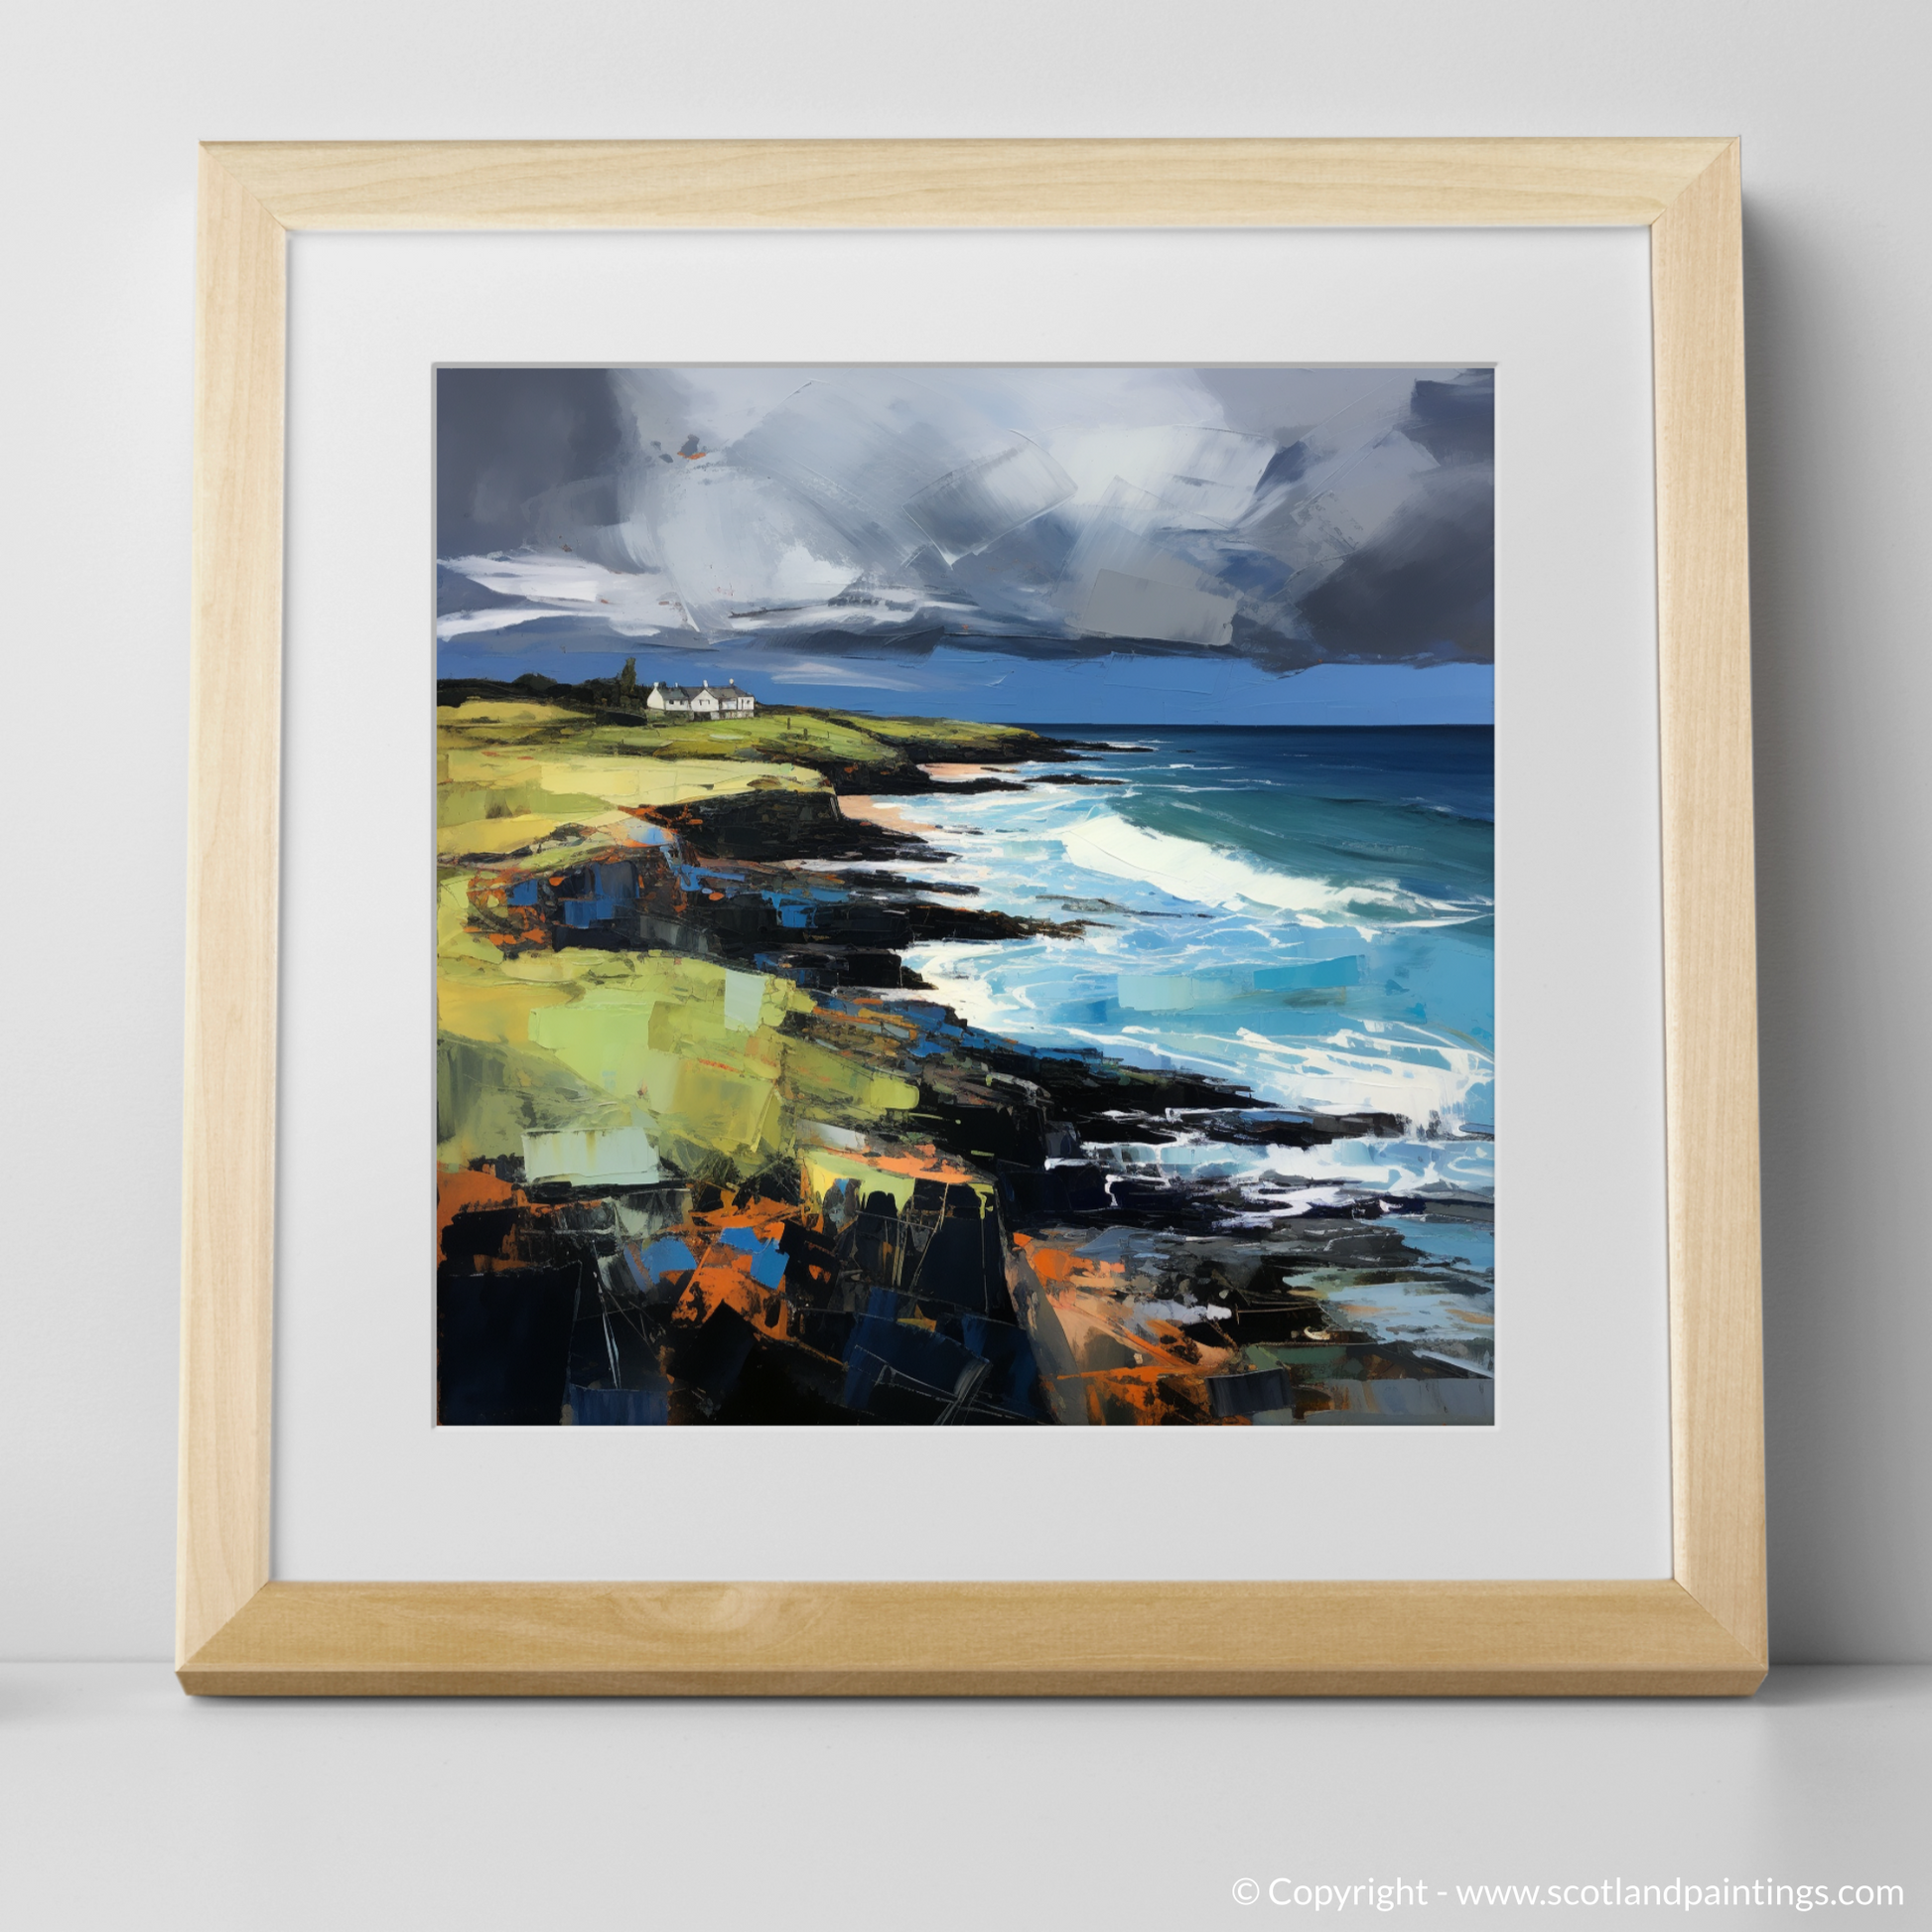 Art Print of Coldingham Bay with a stormy sky with a natural frame